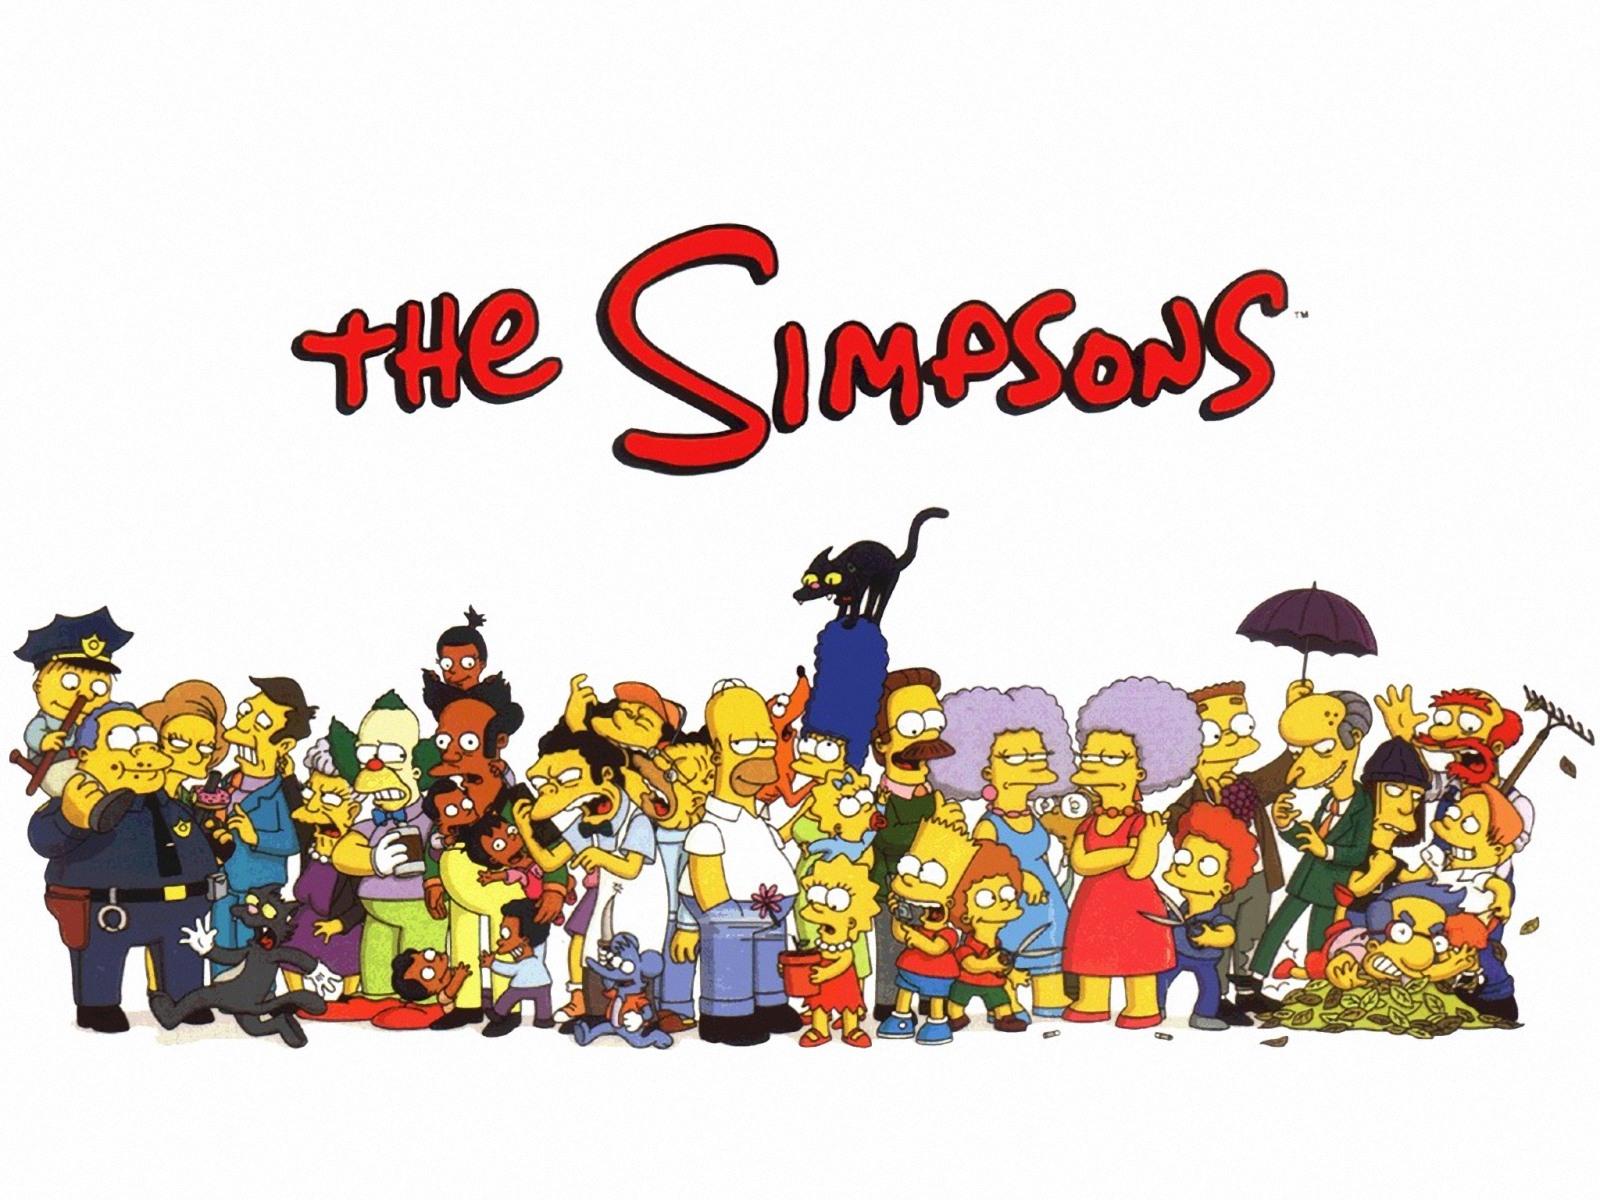 The Simpsons Computer Wallpaper 48977 1600x1200px